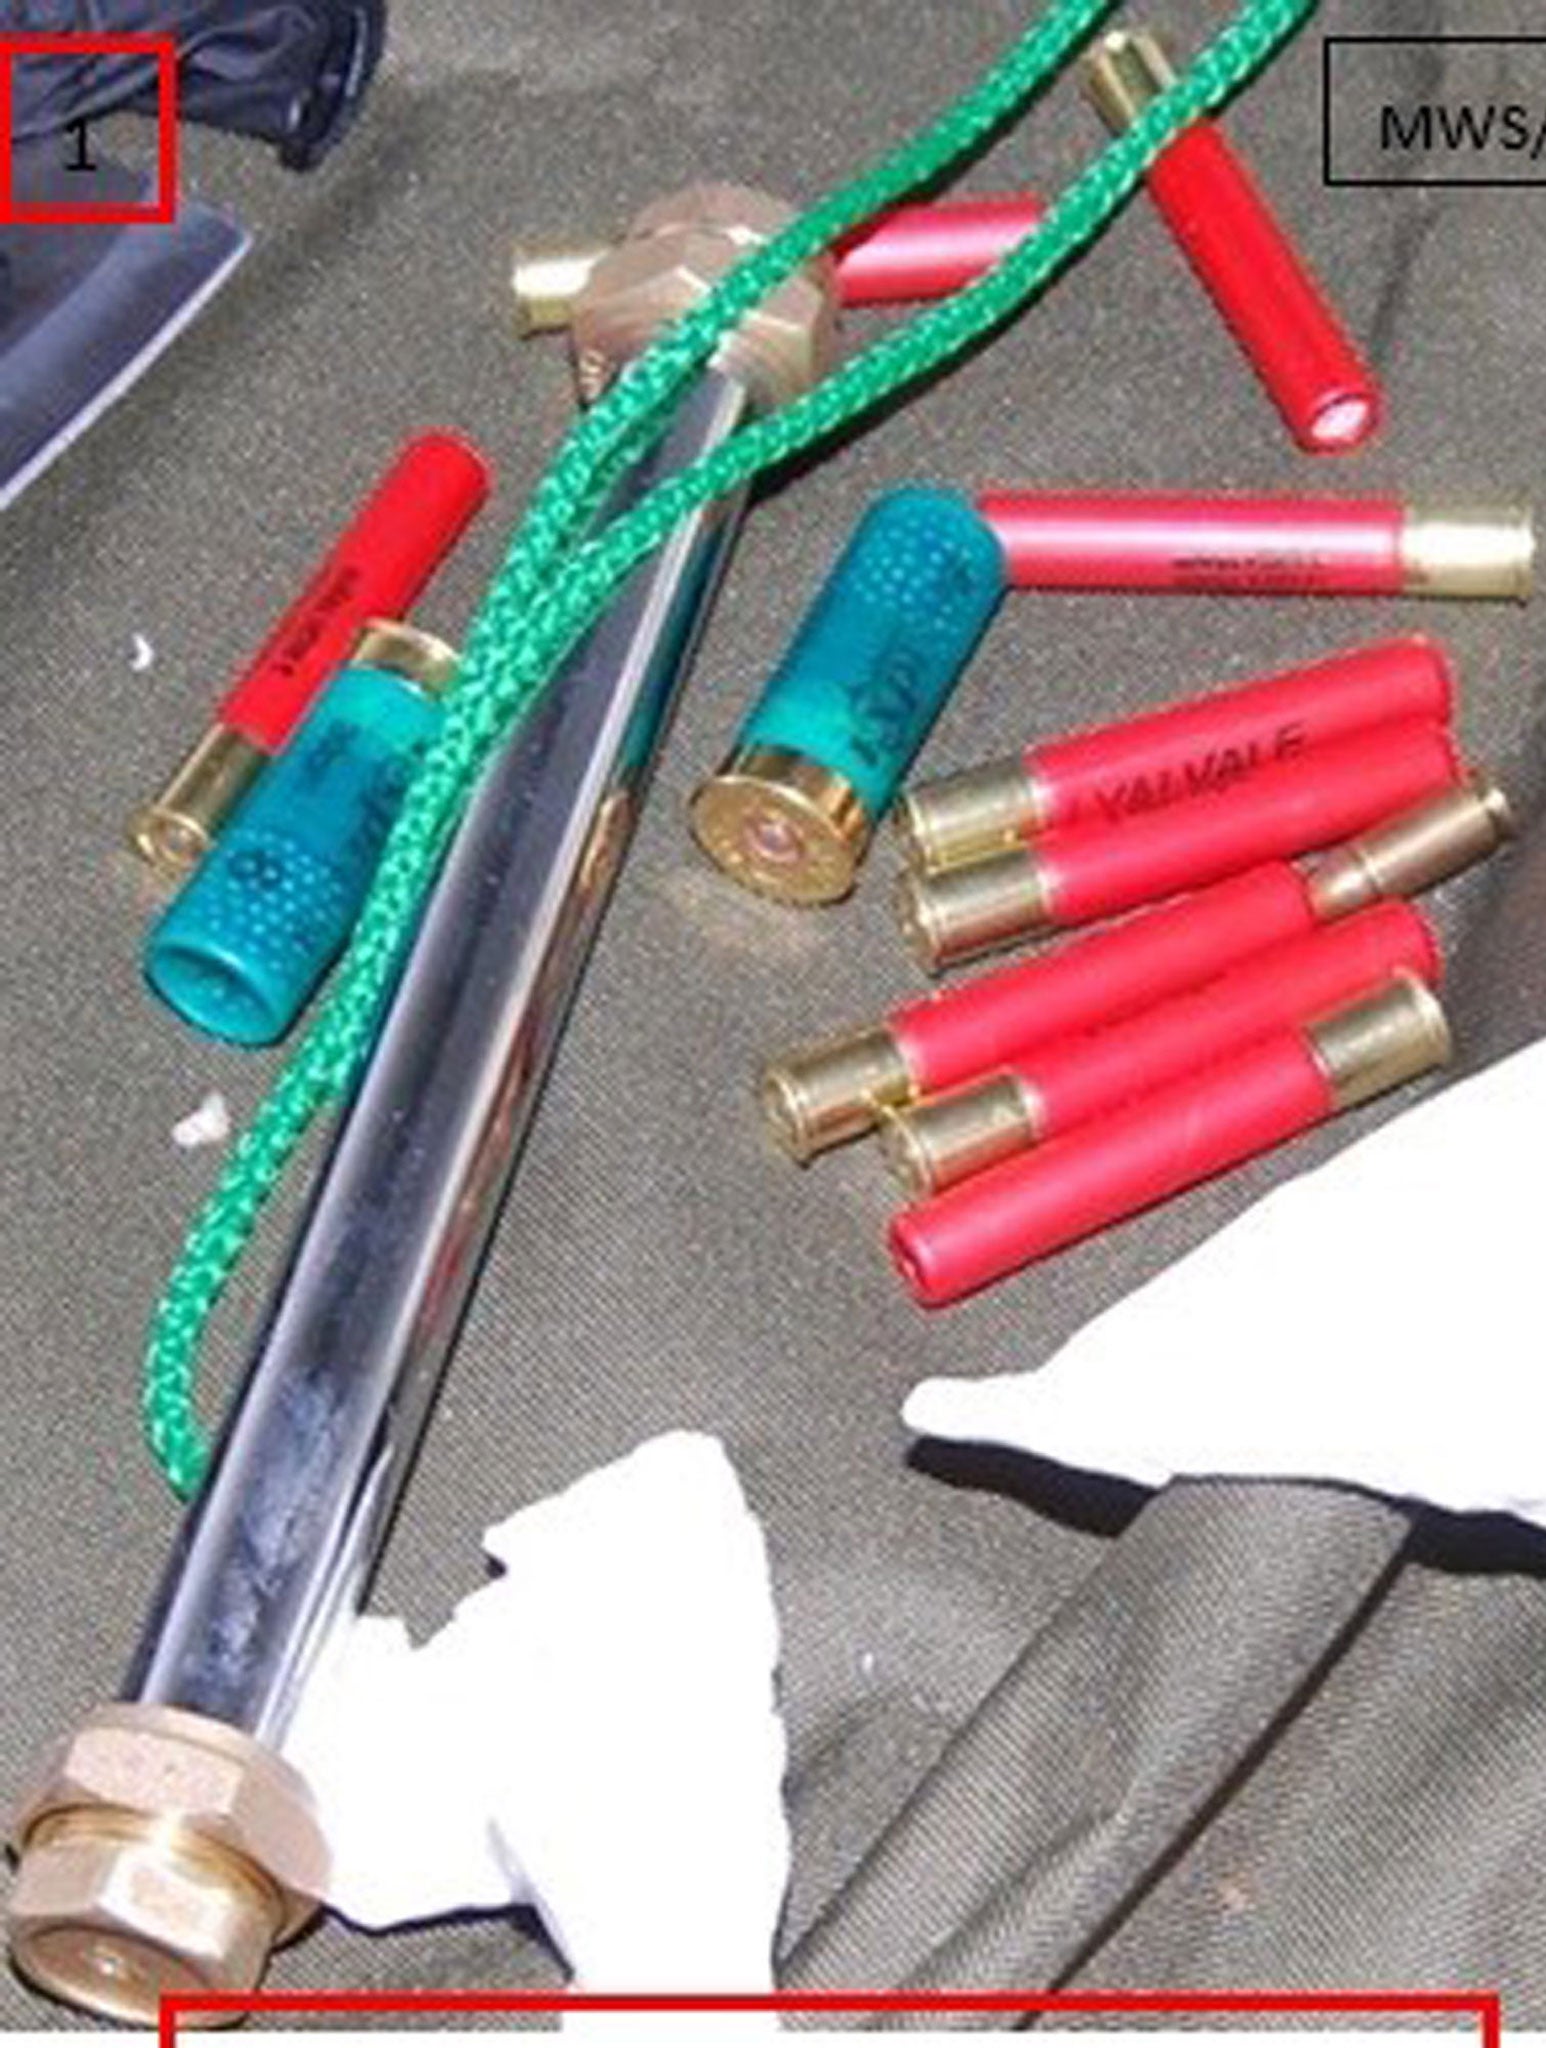 Shotgun cartridges and a partially constructed pipe bomb that was found stashed in Naweed Ali's Seat Leon car